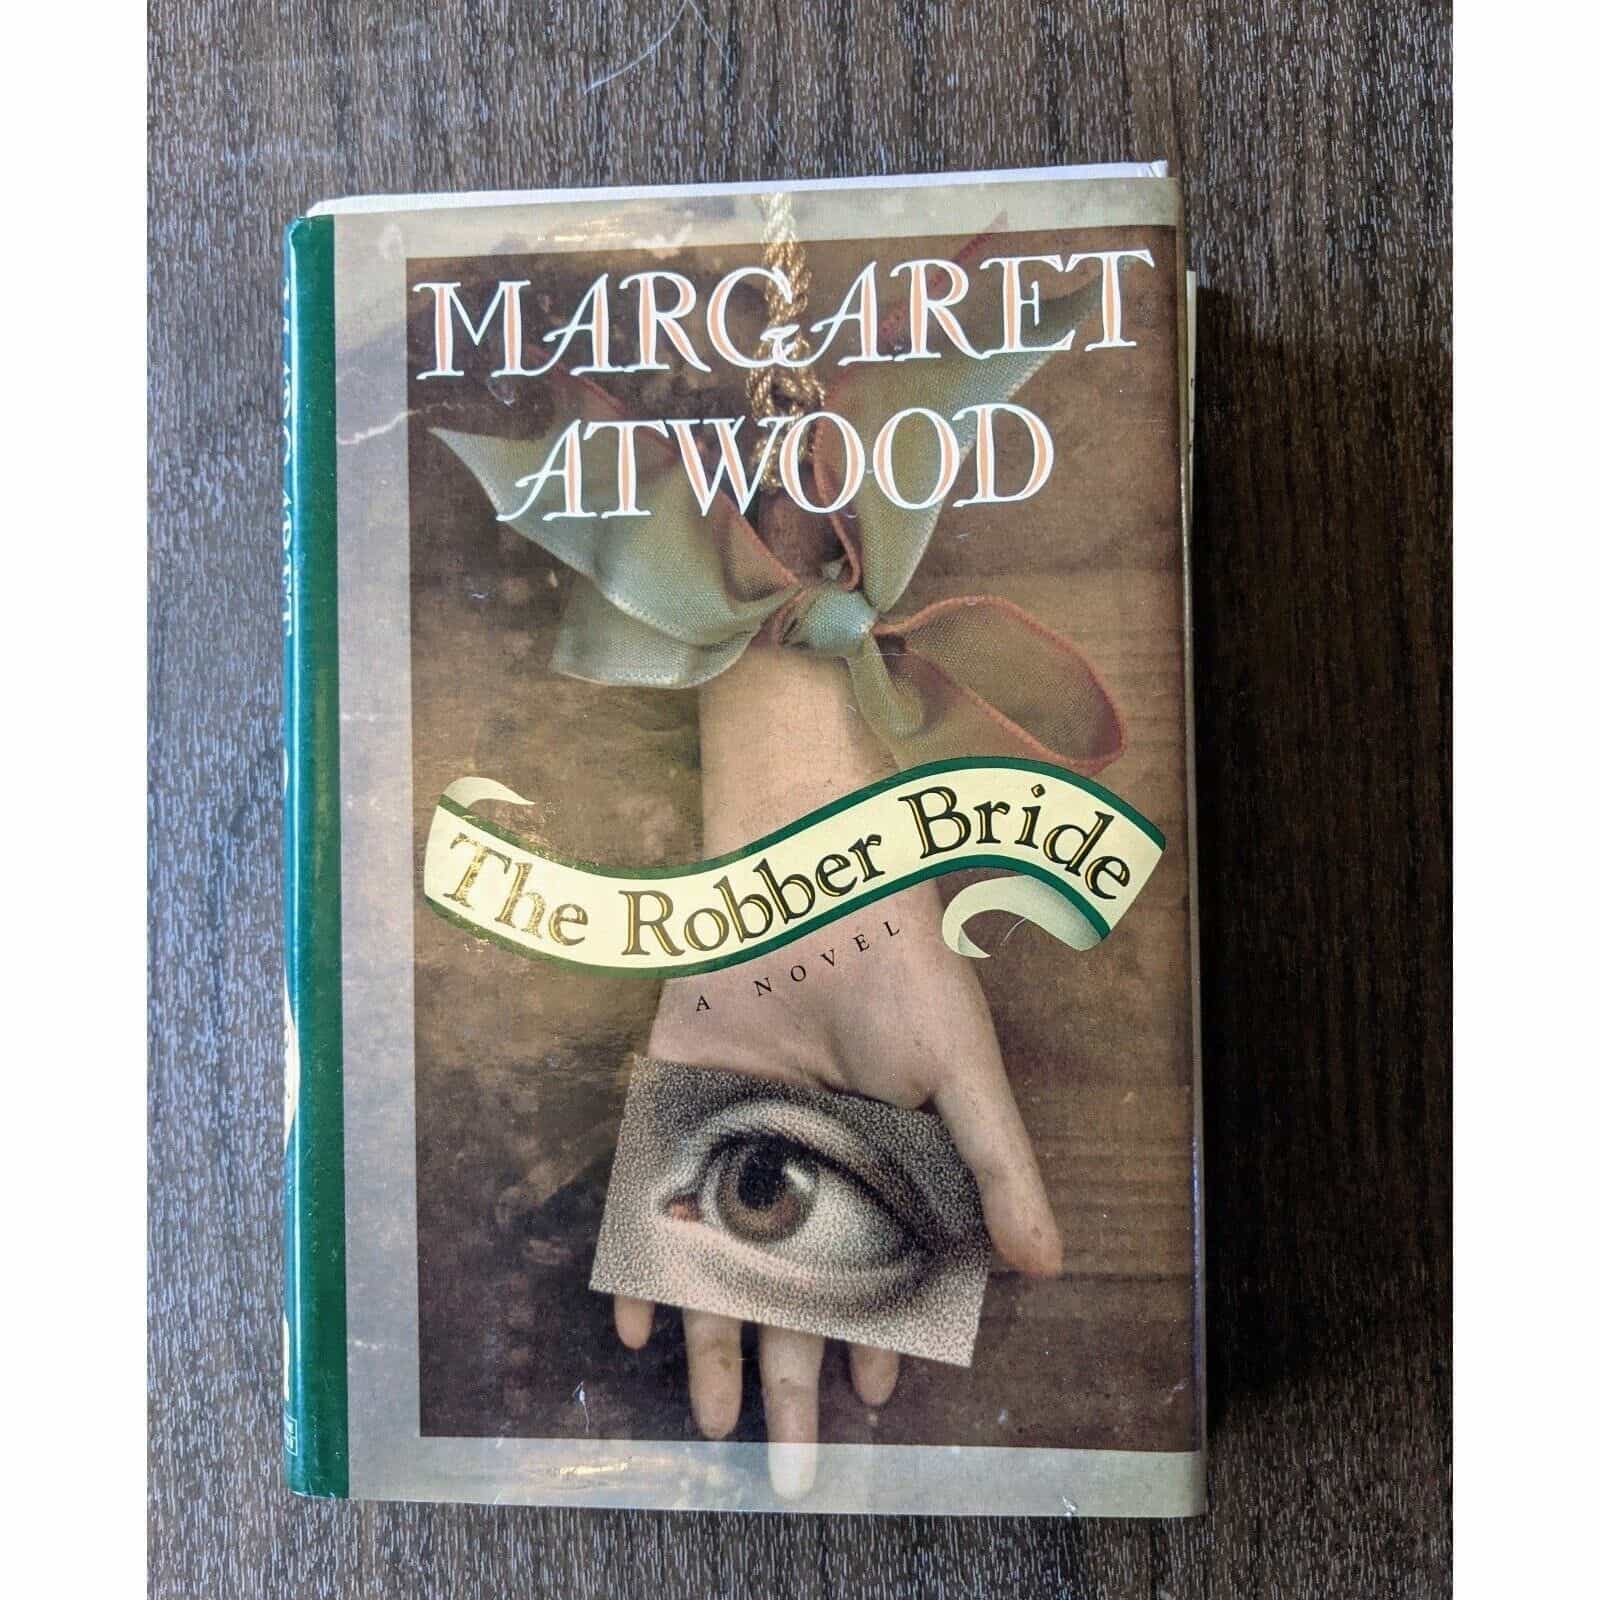 The Robber Bride by Margaret Atwood Book